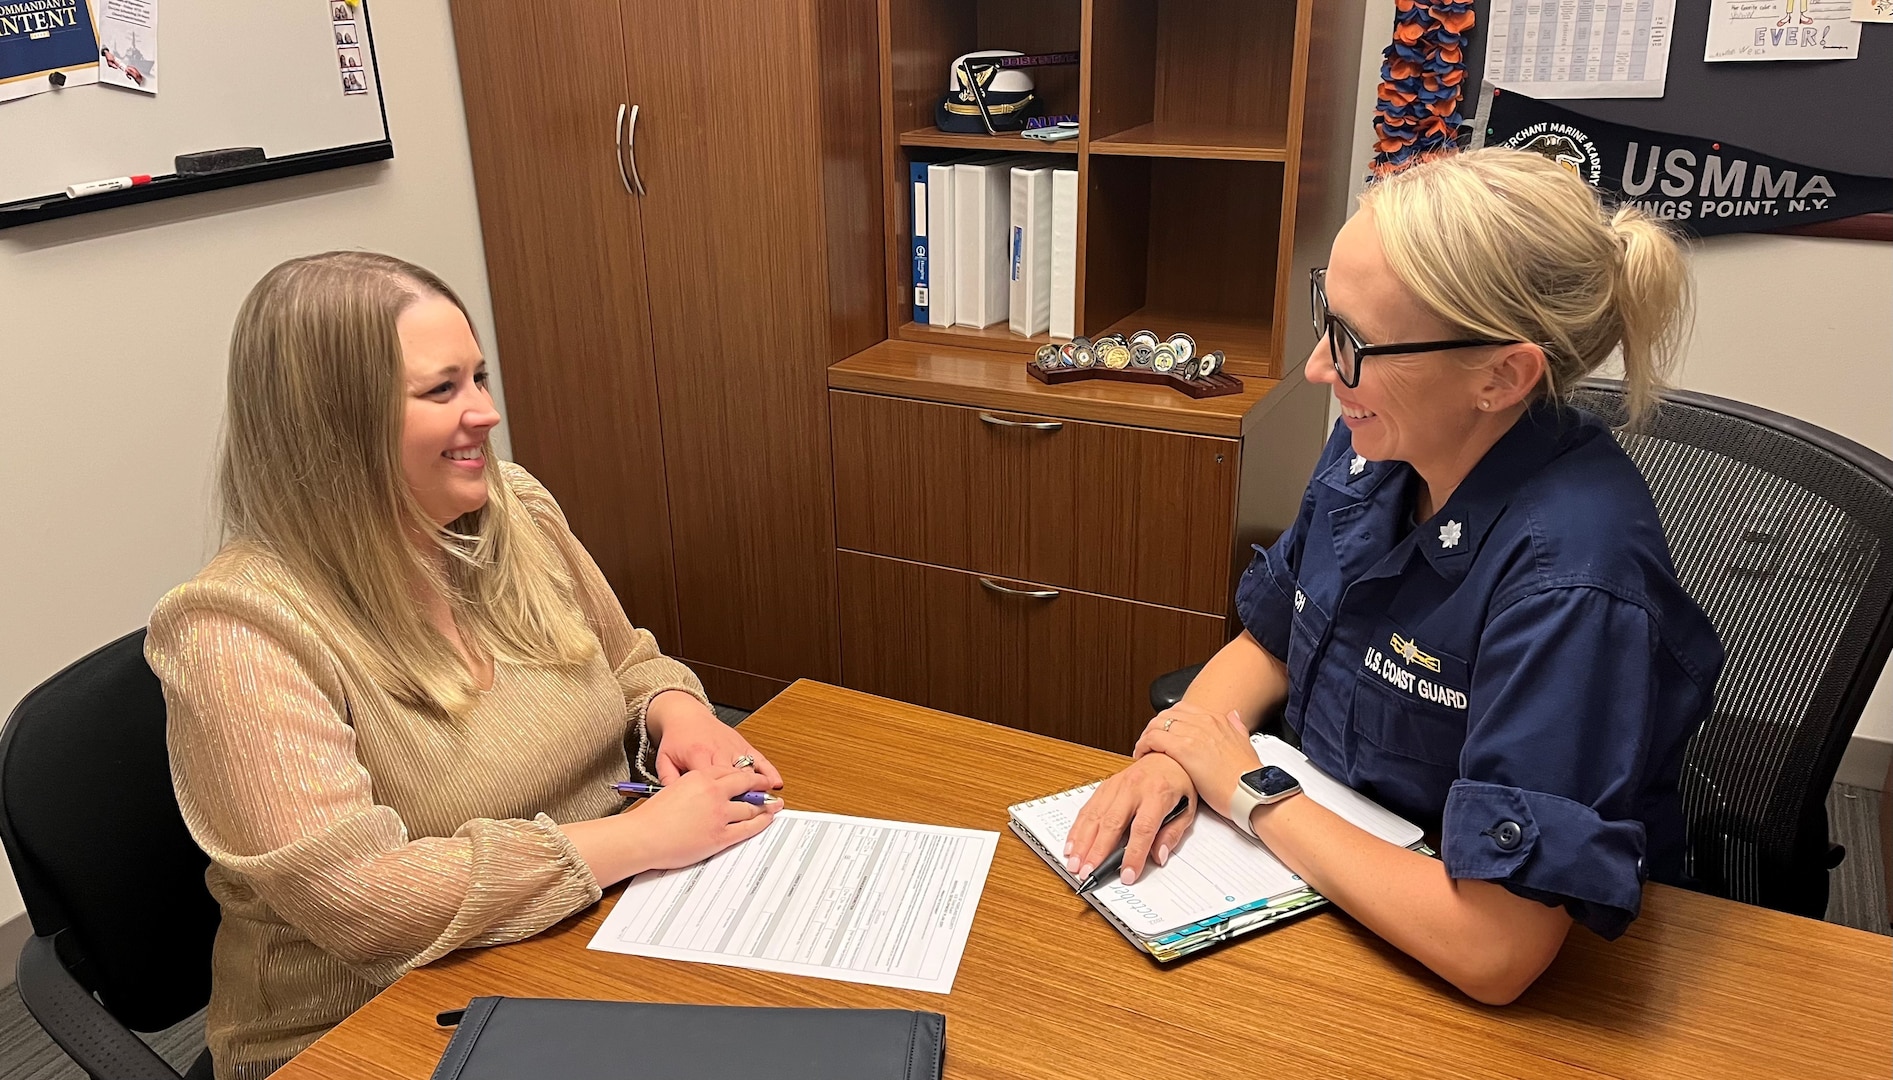 Cmdr. Krista Welch, Force Readiness Command (FORCECOM) - Training Mission Support Branch Chief, reviews the Individual Development Plan process and form with Leah Sibbitt, FORCECOM – Training Manager.